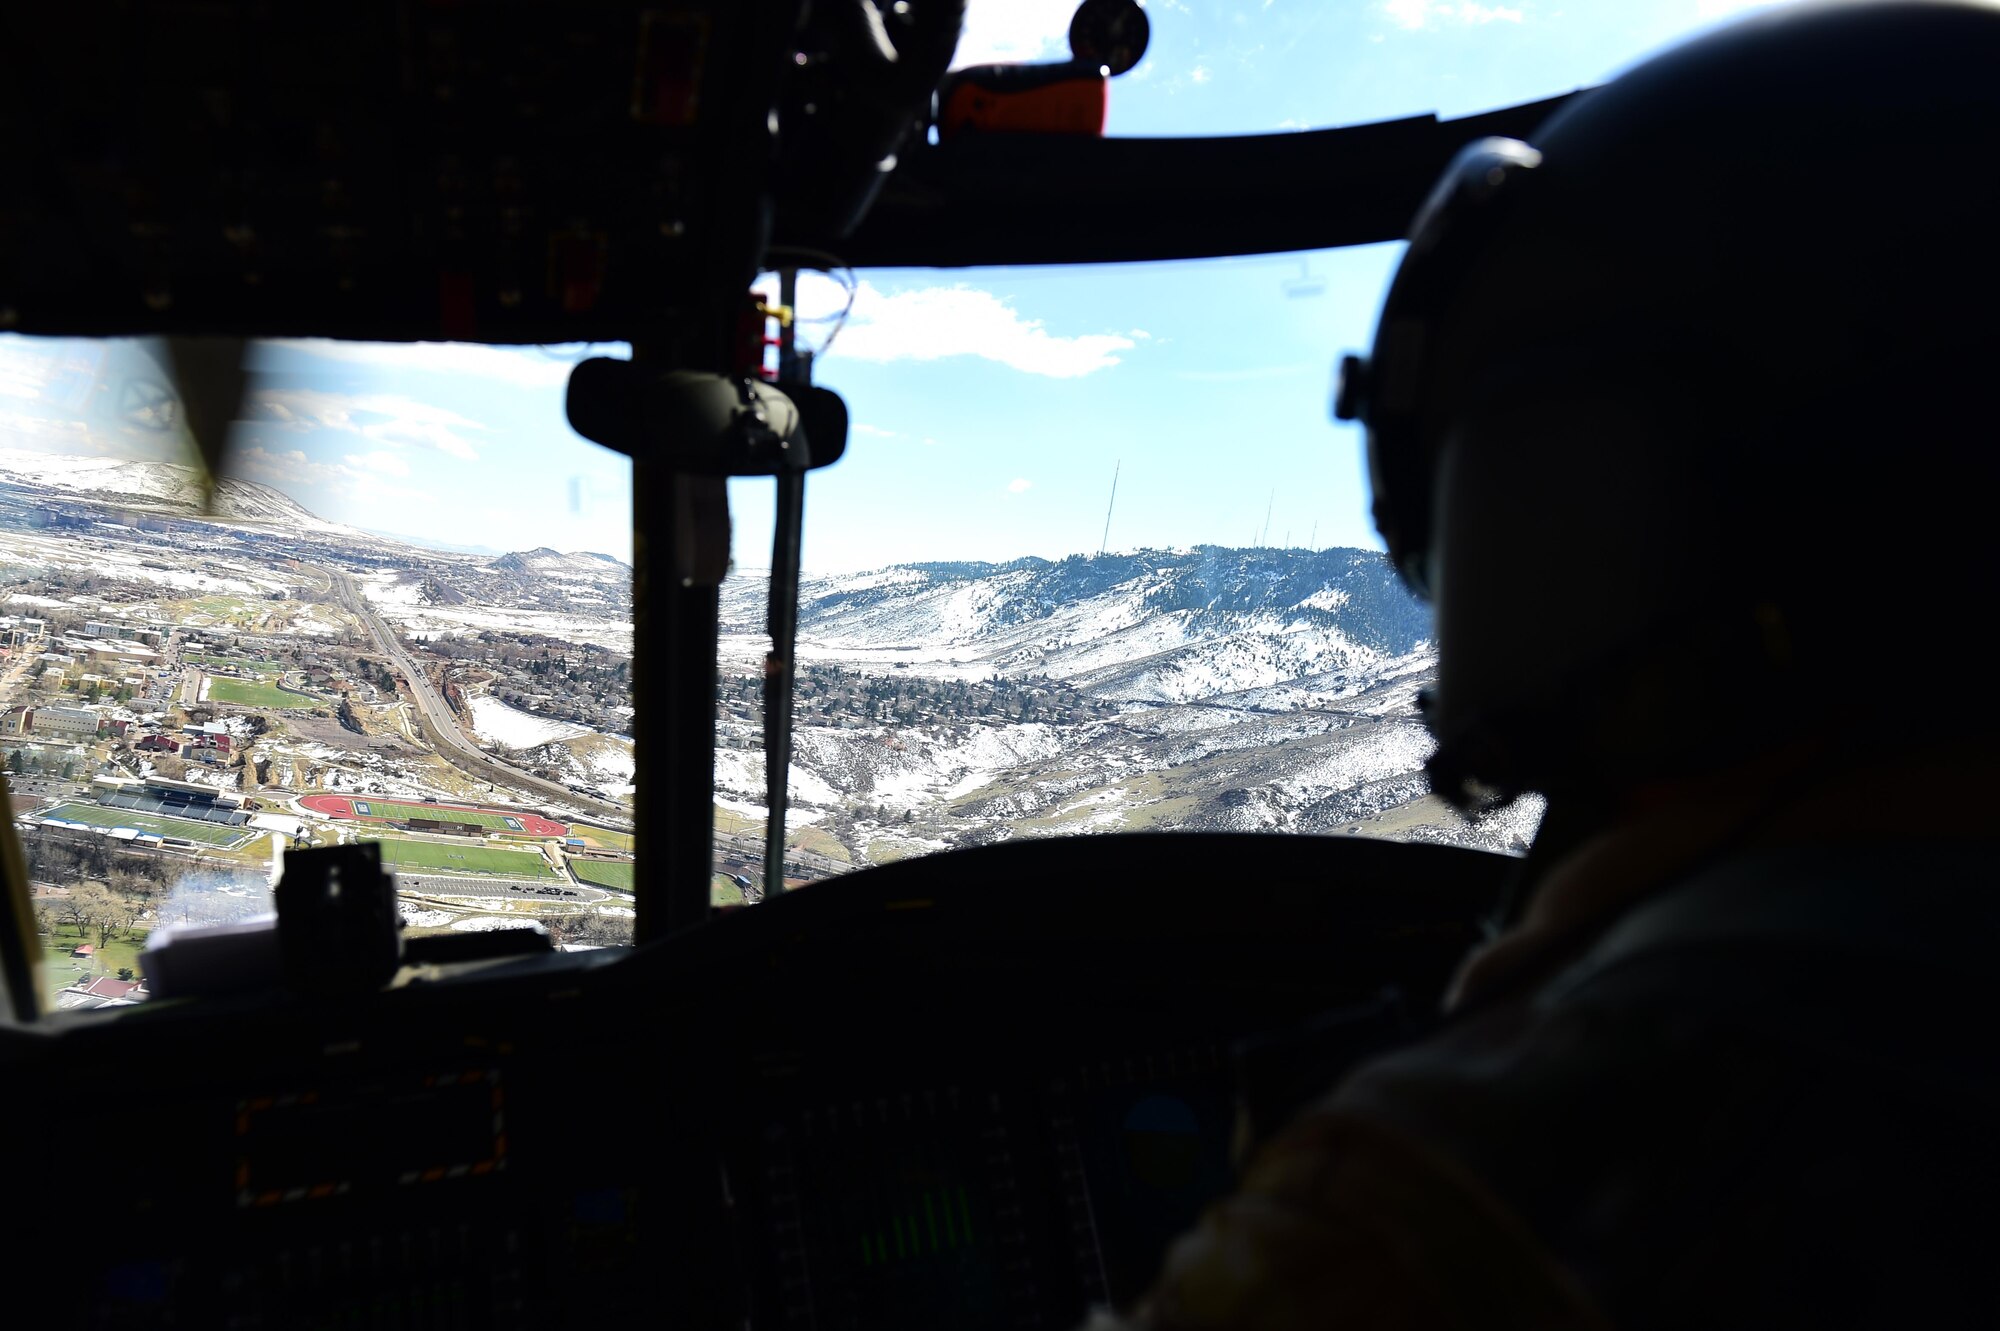 U.S. Army Chief Warrant Officer 4 Ronald Trani, Bravo Company 2-135th General Support Aviation Battalion CH-47 Chinook senior instructor pilot, flies through a passApril 1, 2016, during a flight over Denver. Instructor pilots administer check rides to pilots to ensure safety standards are met. (U.S. Air Force photo by Airman 1st Class Gabrielle Spradling/Released)